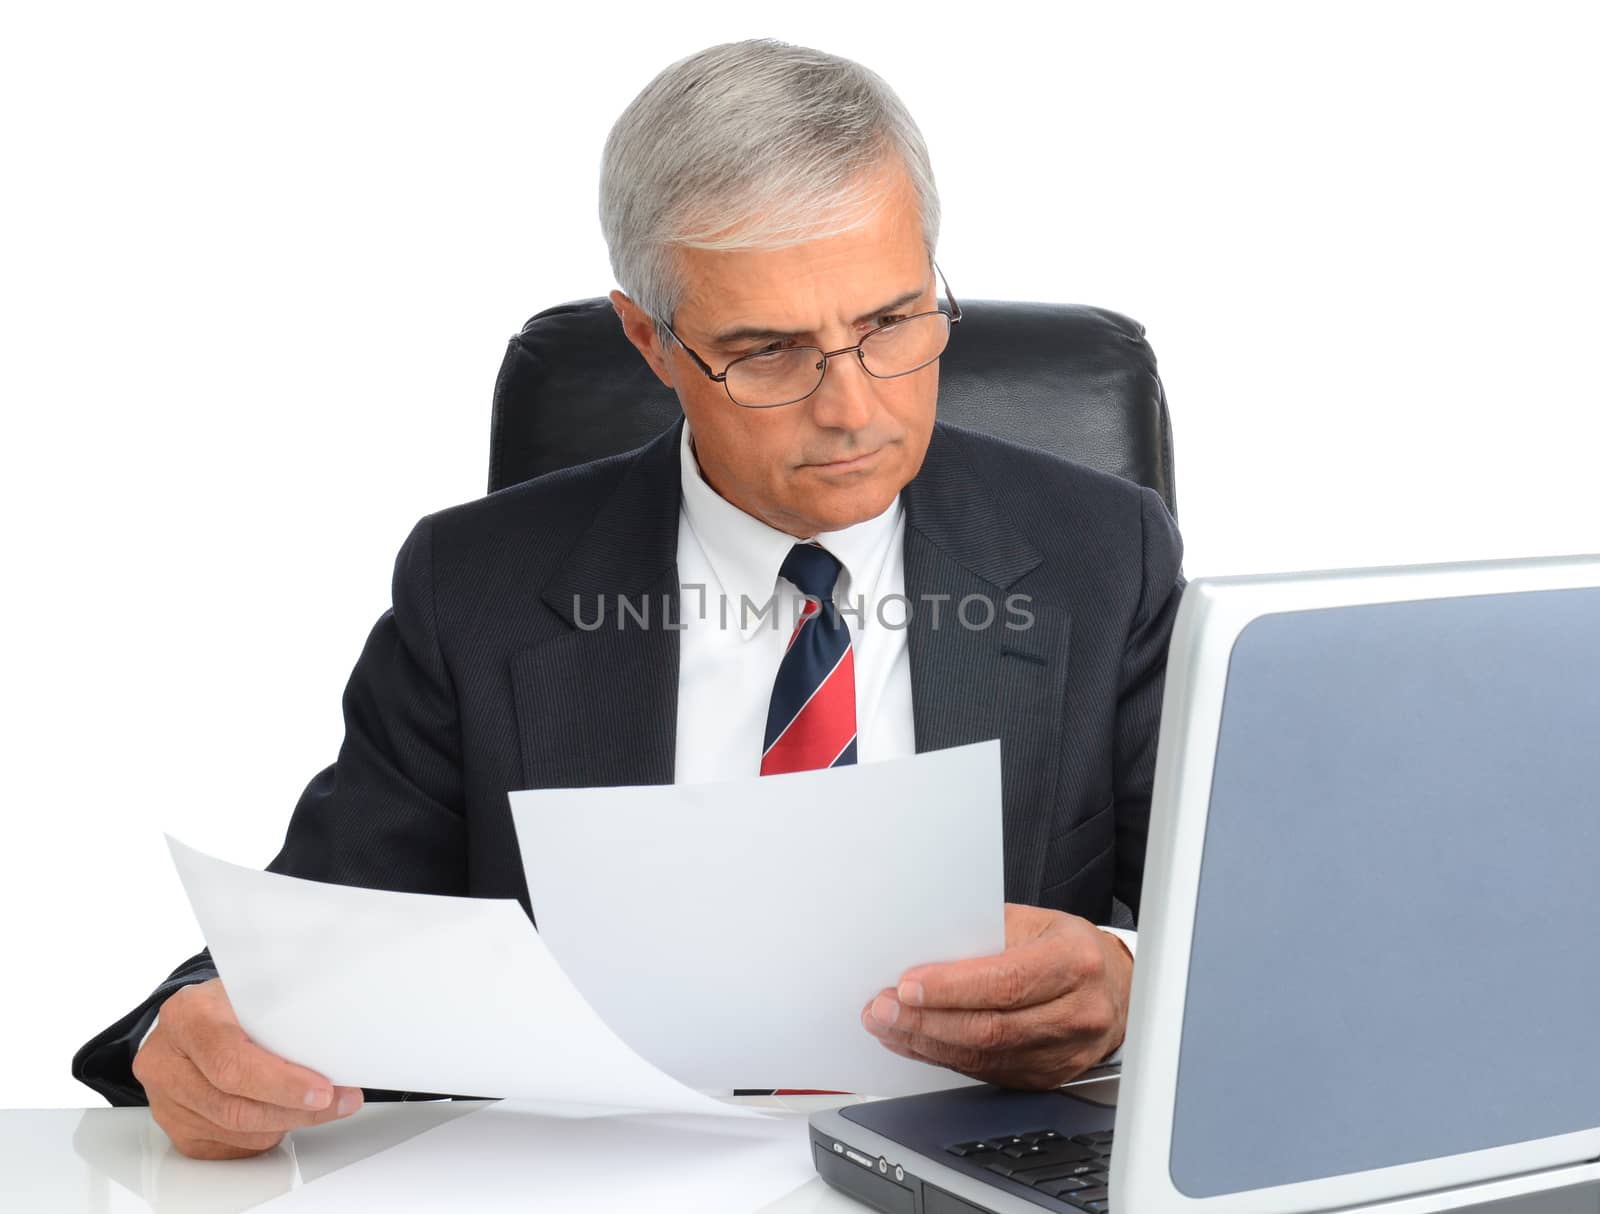 Mature businessman at desk comparing note to laptop screen. Man is wearing eye glasses over a white background.